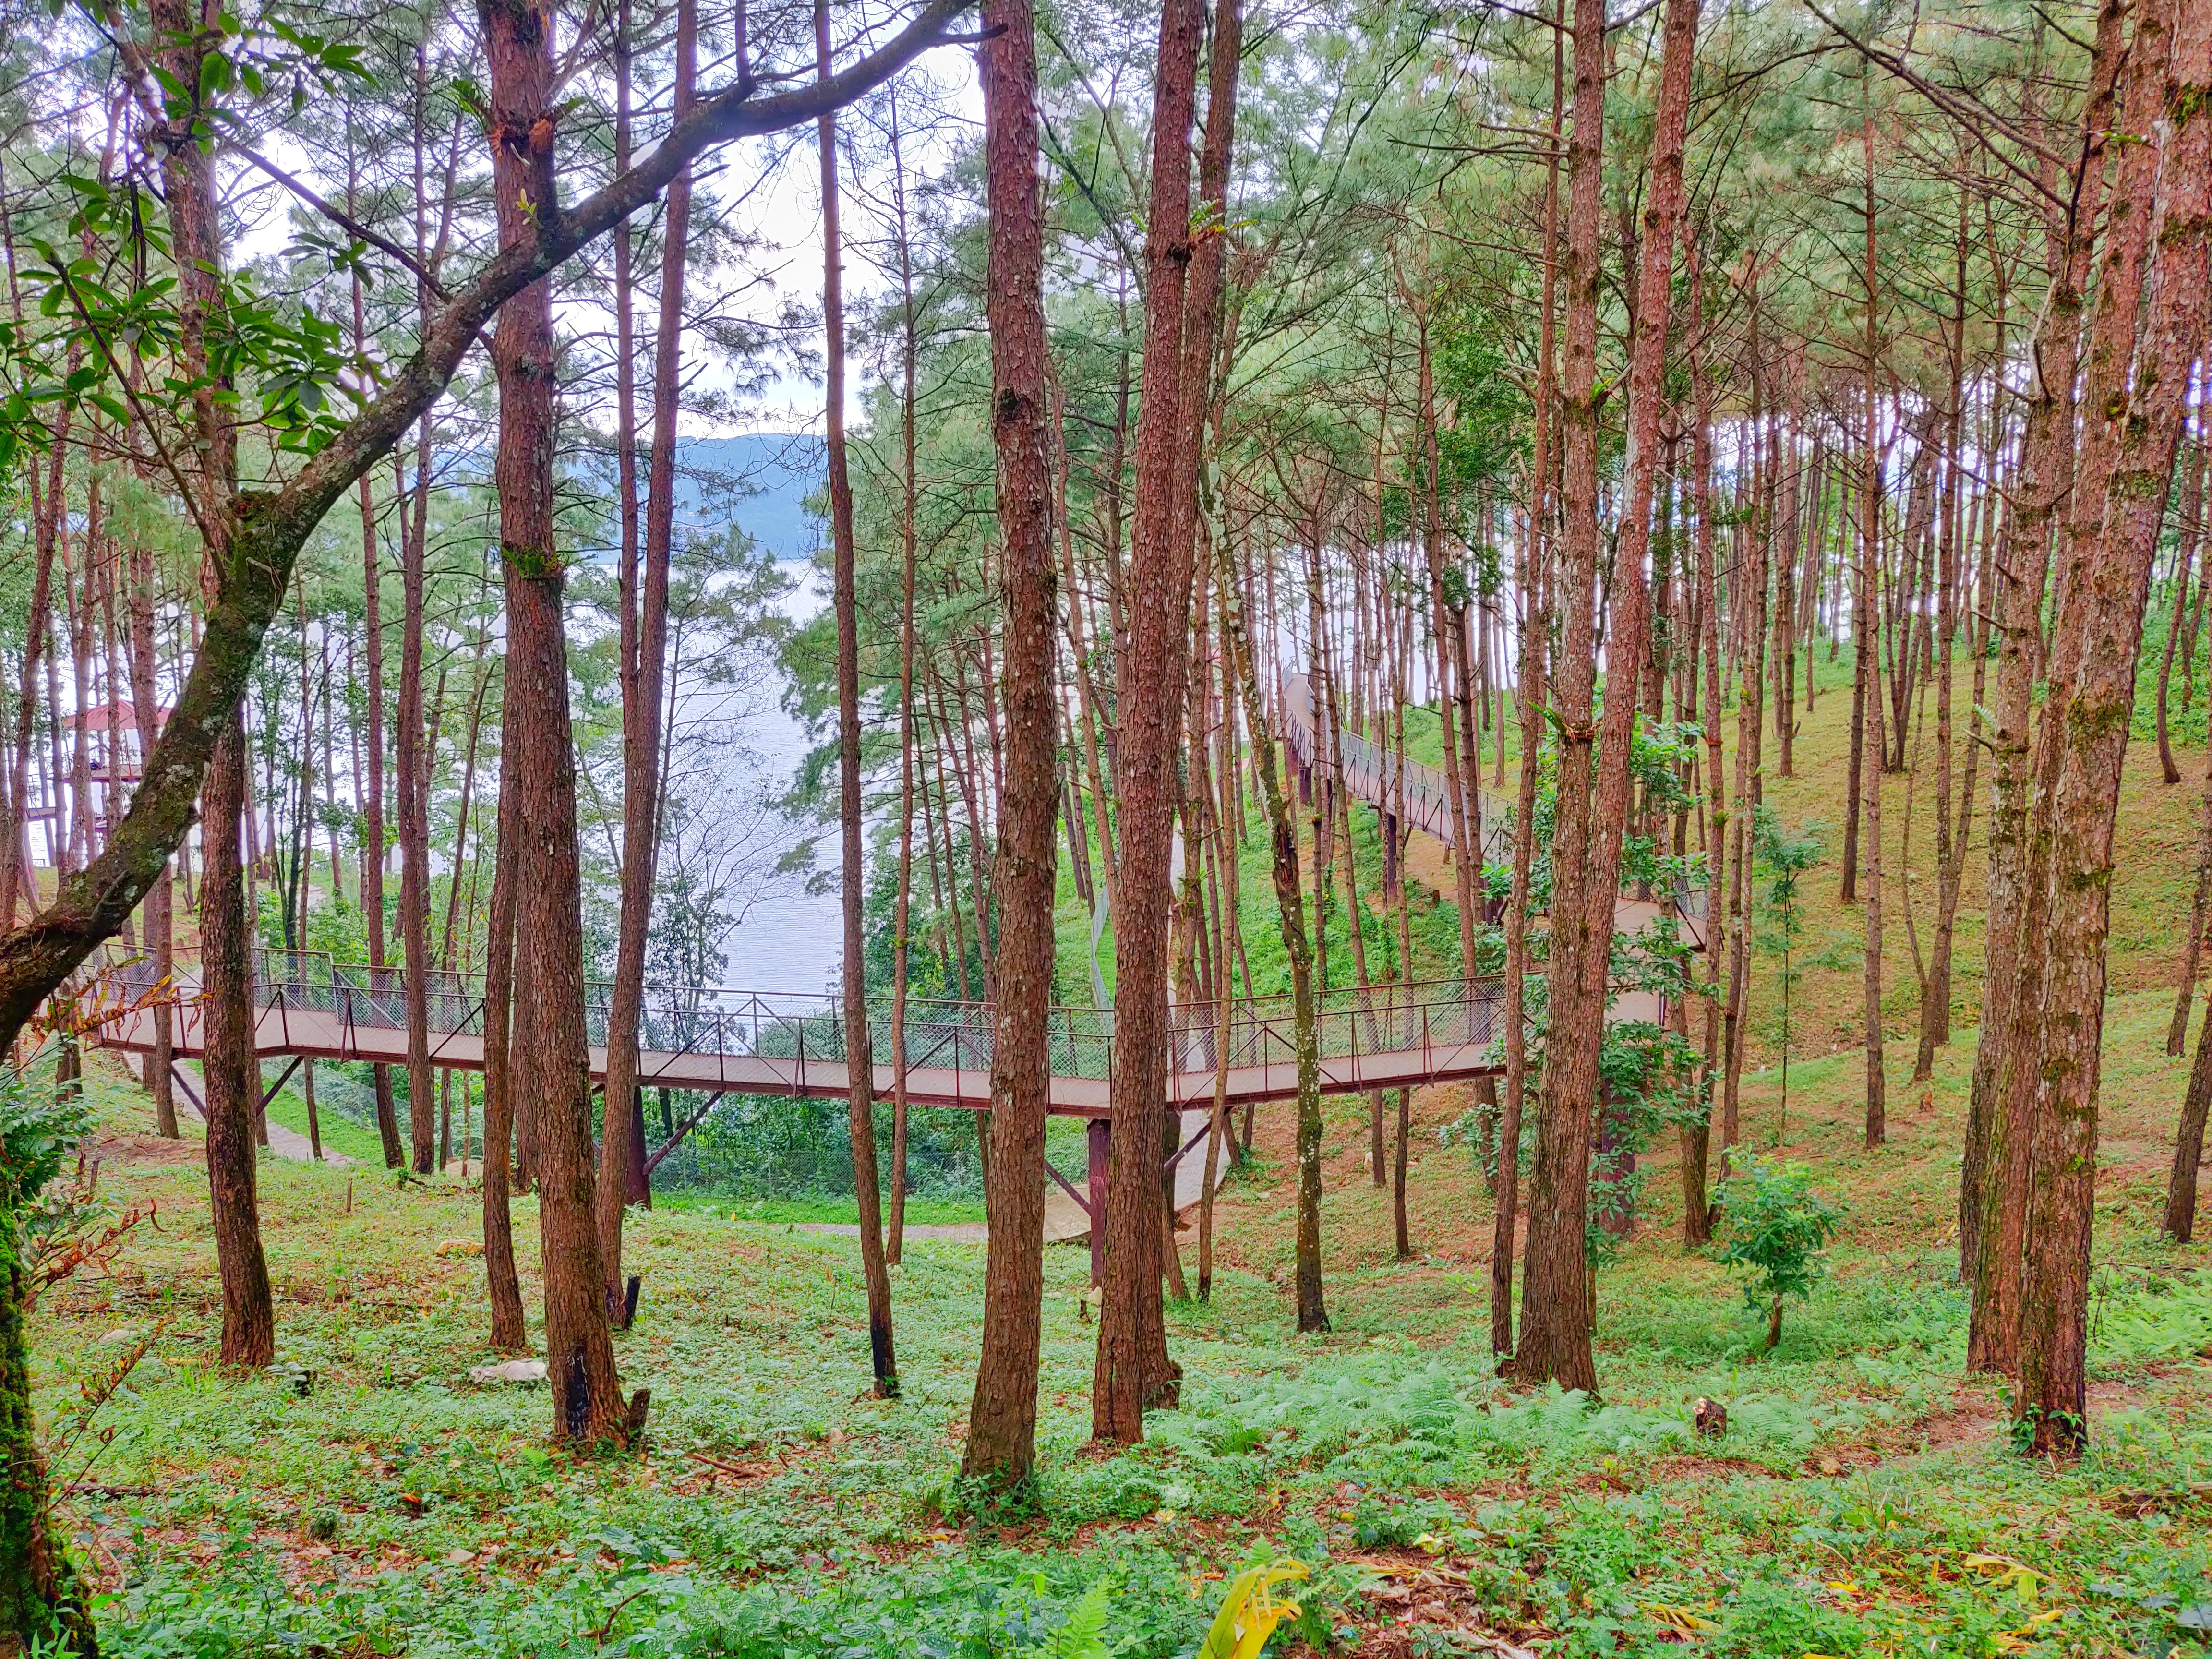 Excursion to Shillong  6 Days & 5 Nights